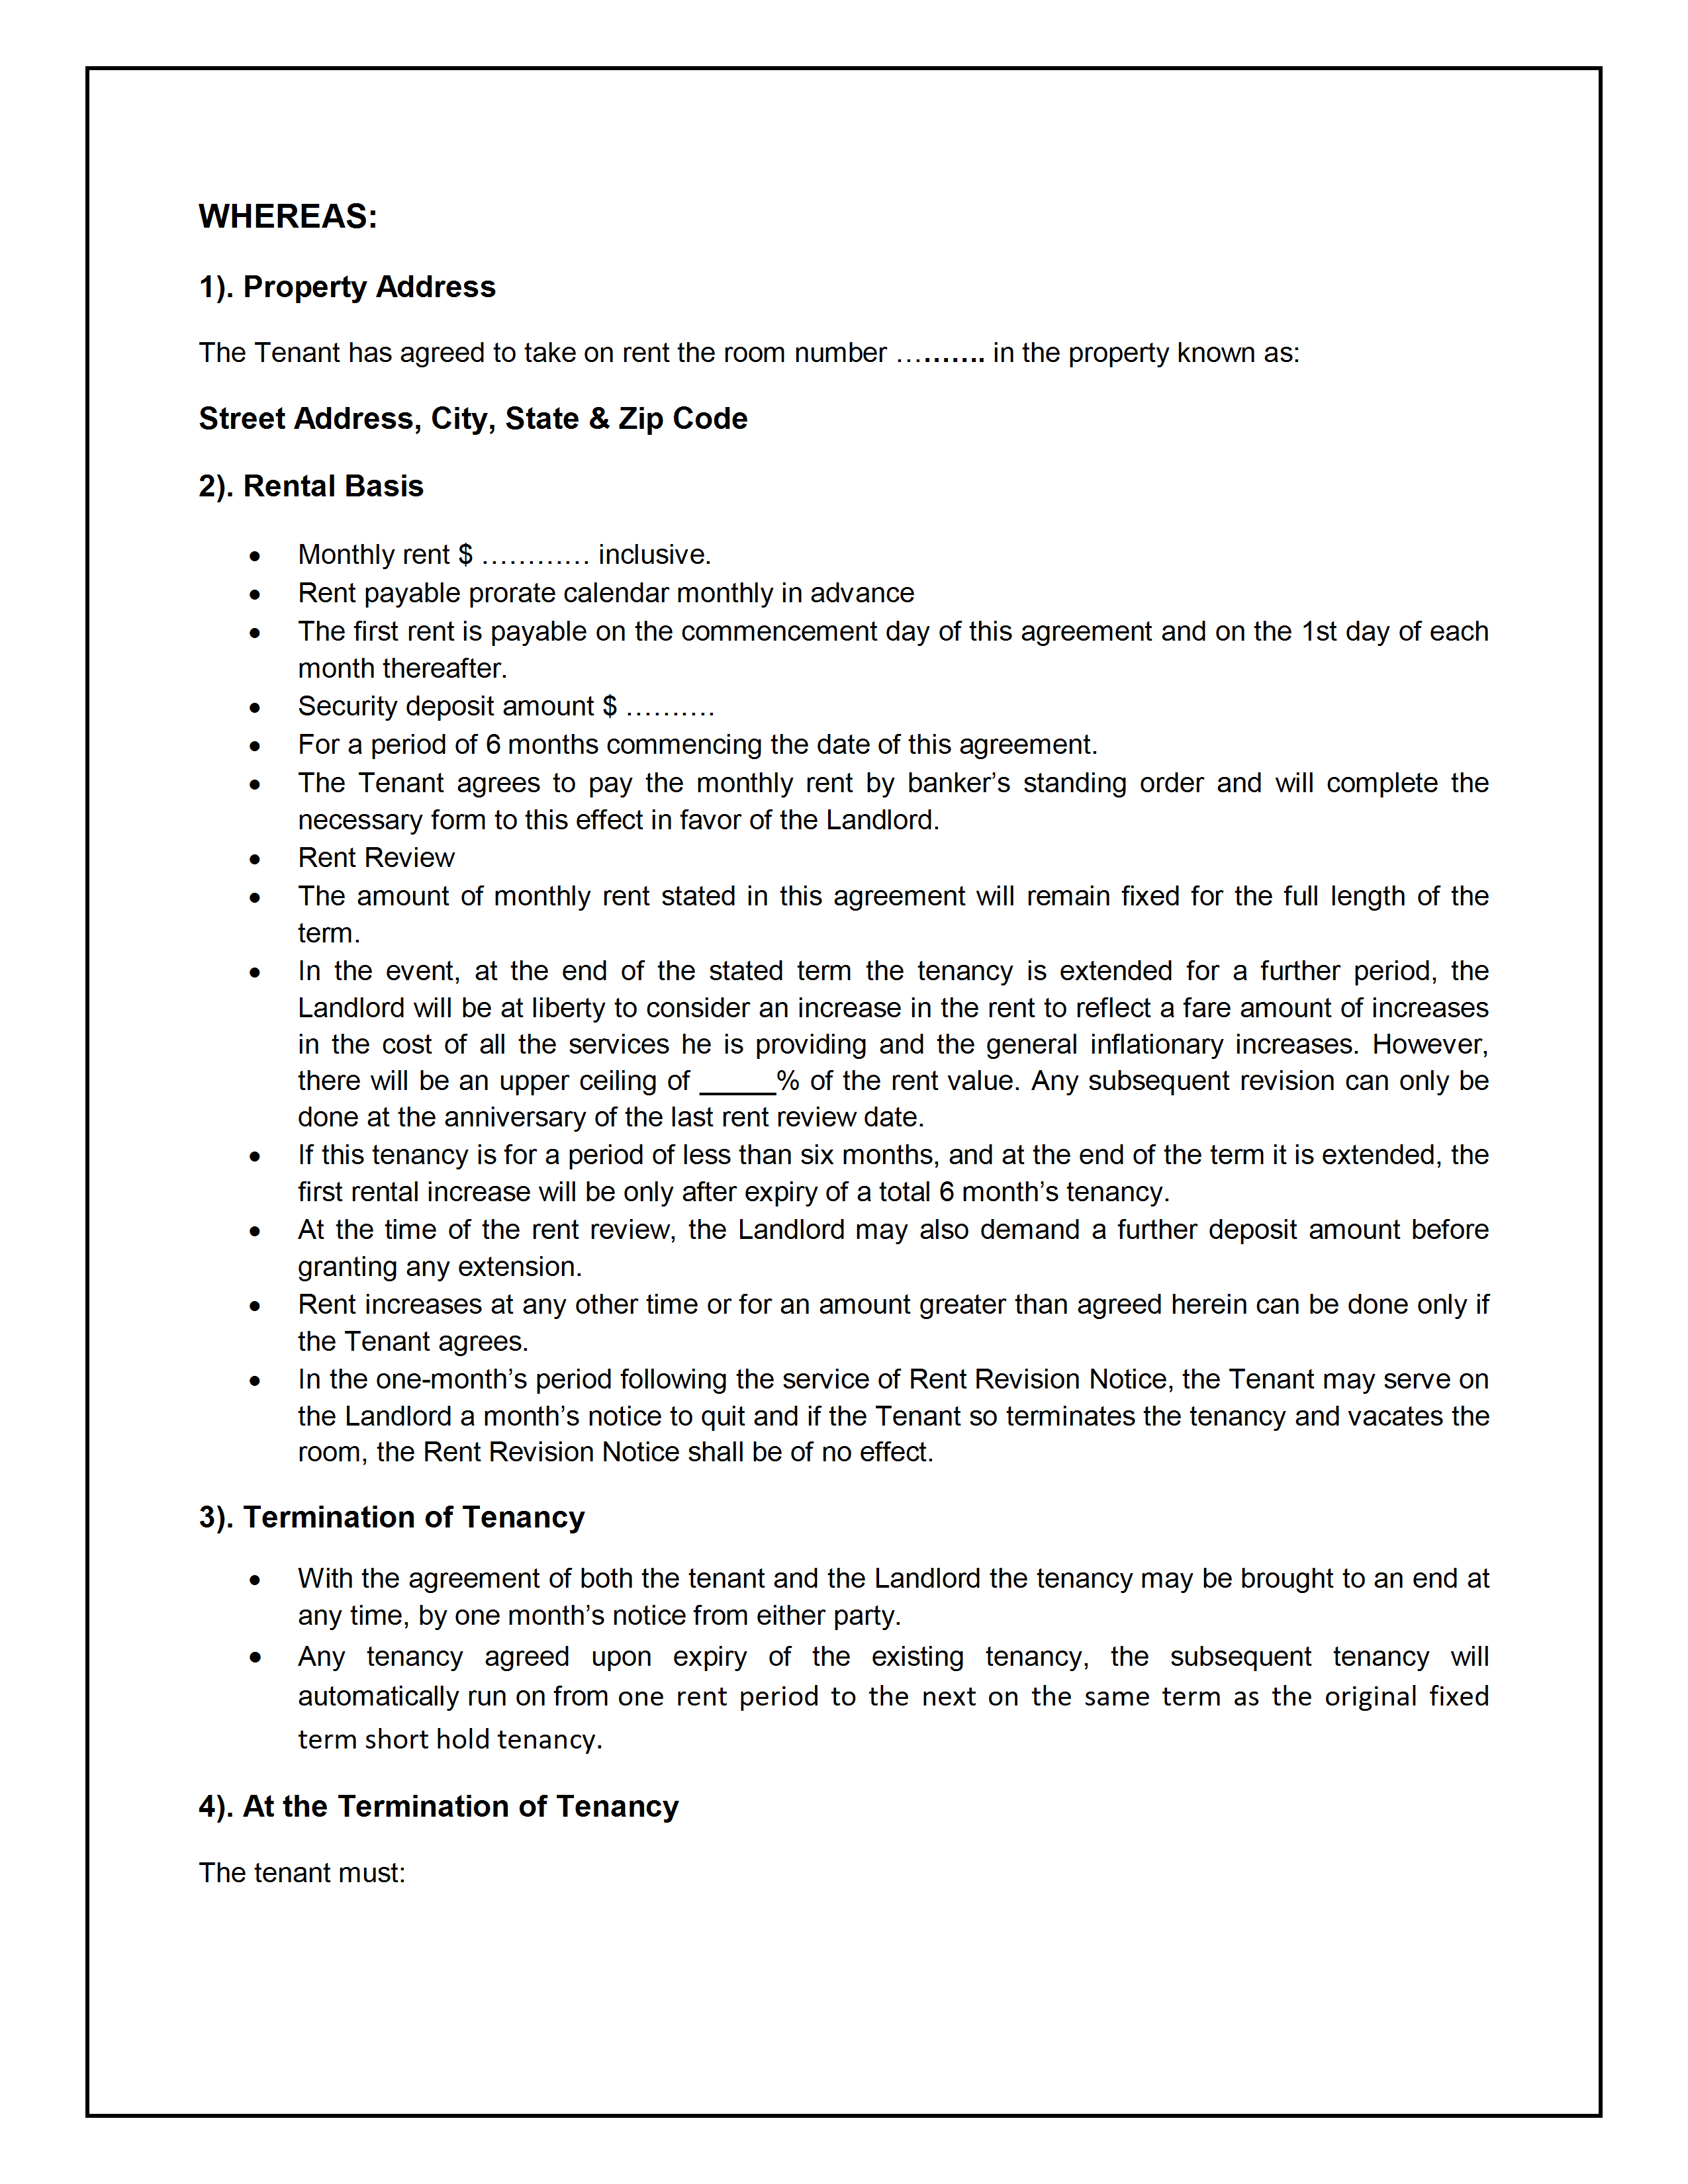 Contract Rental Agreement Template Tenancy Agreement Template